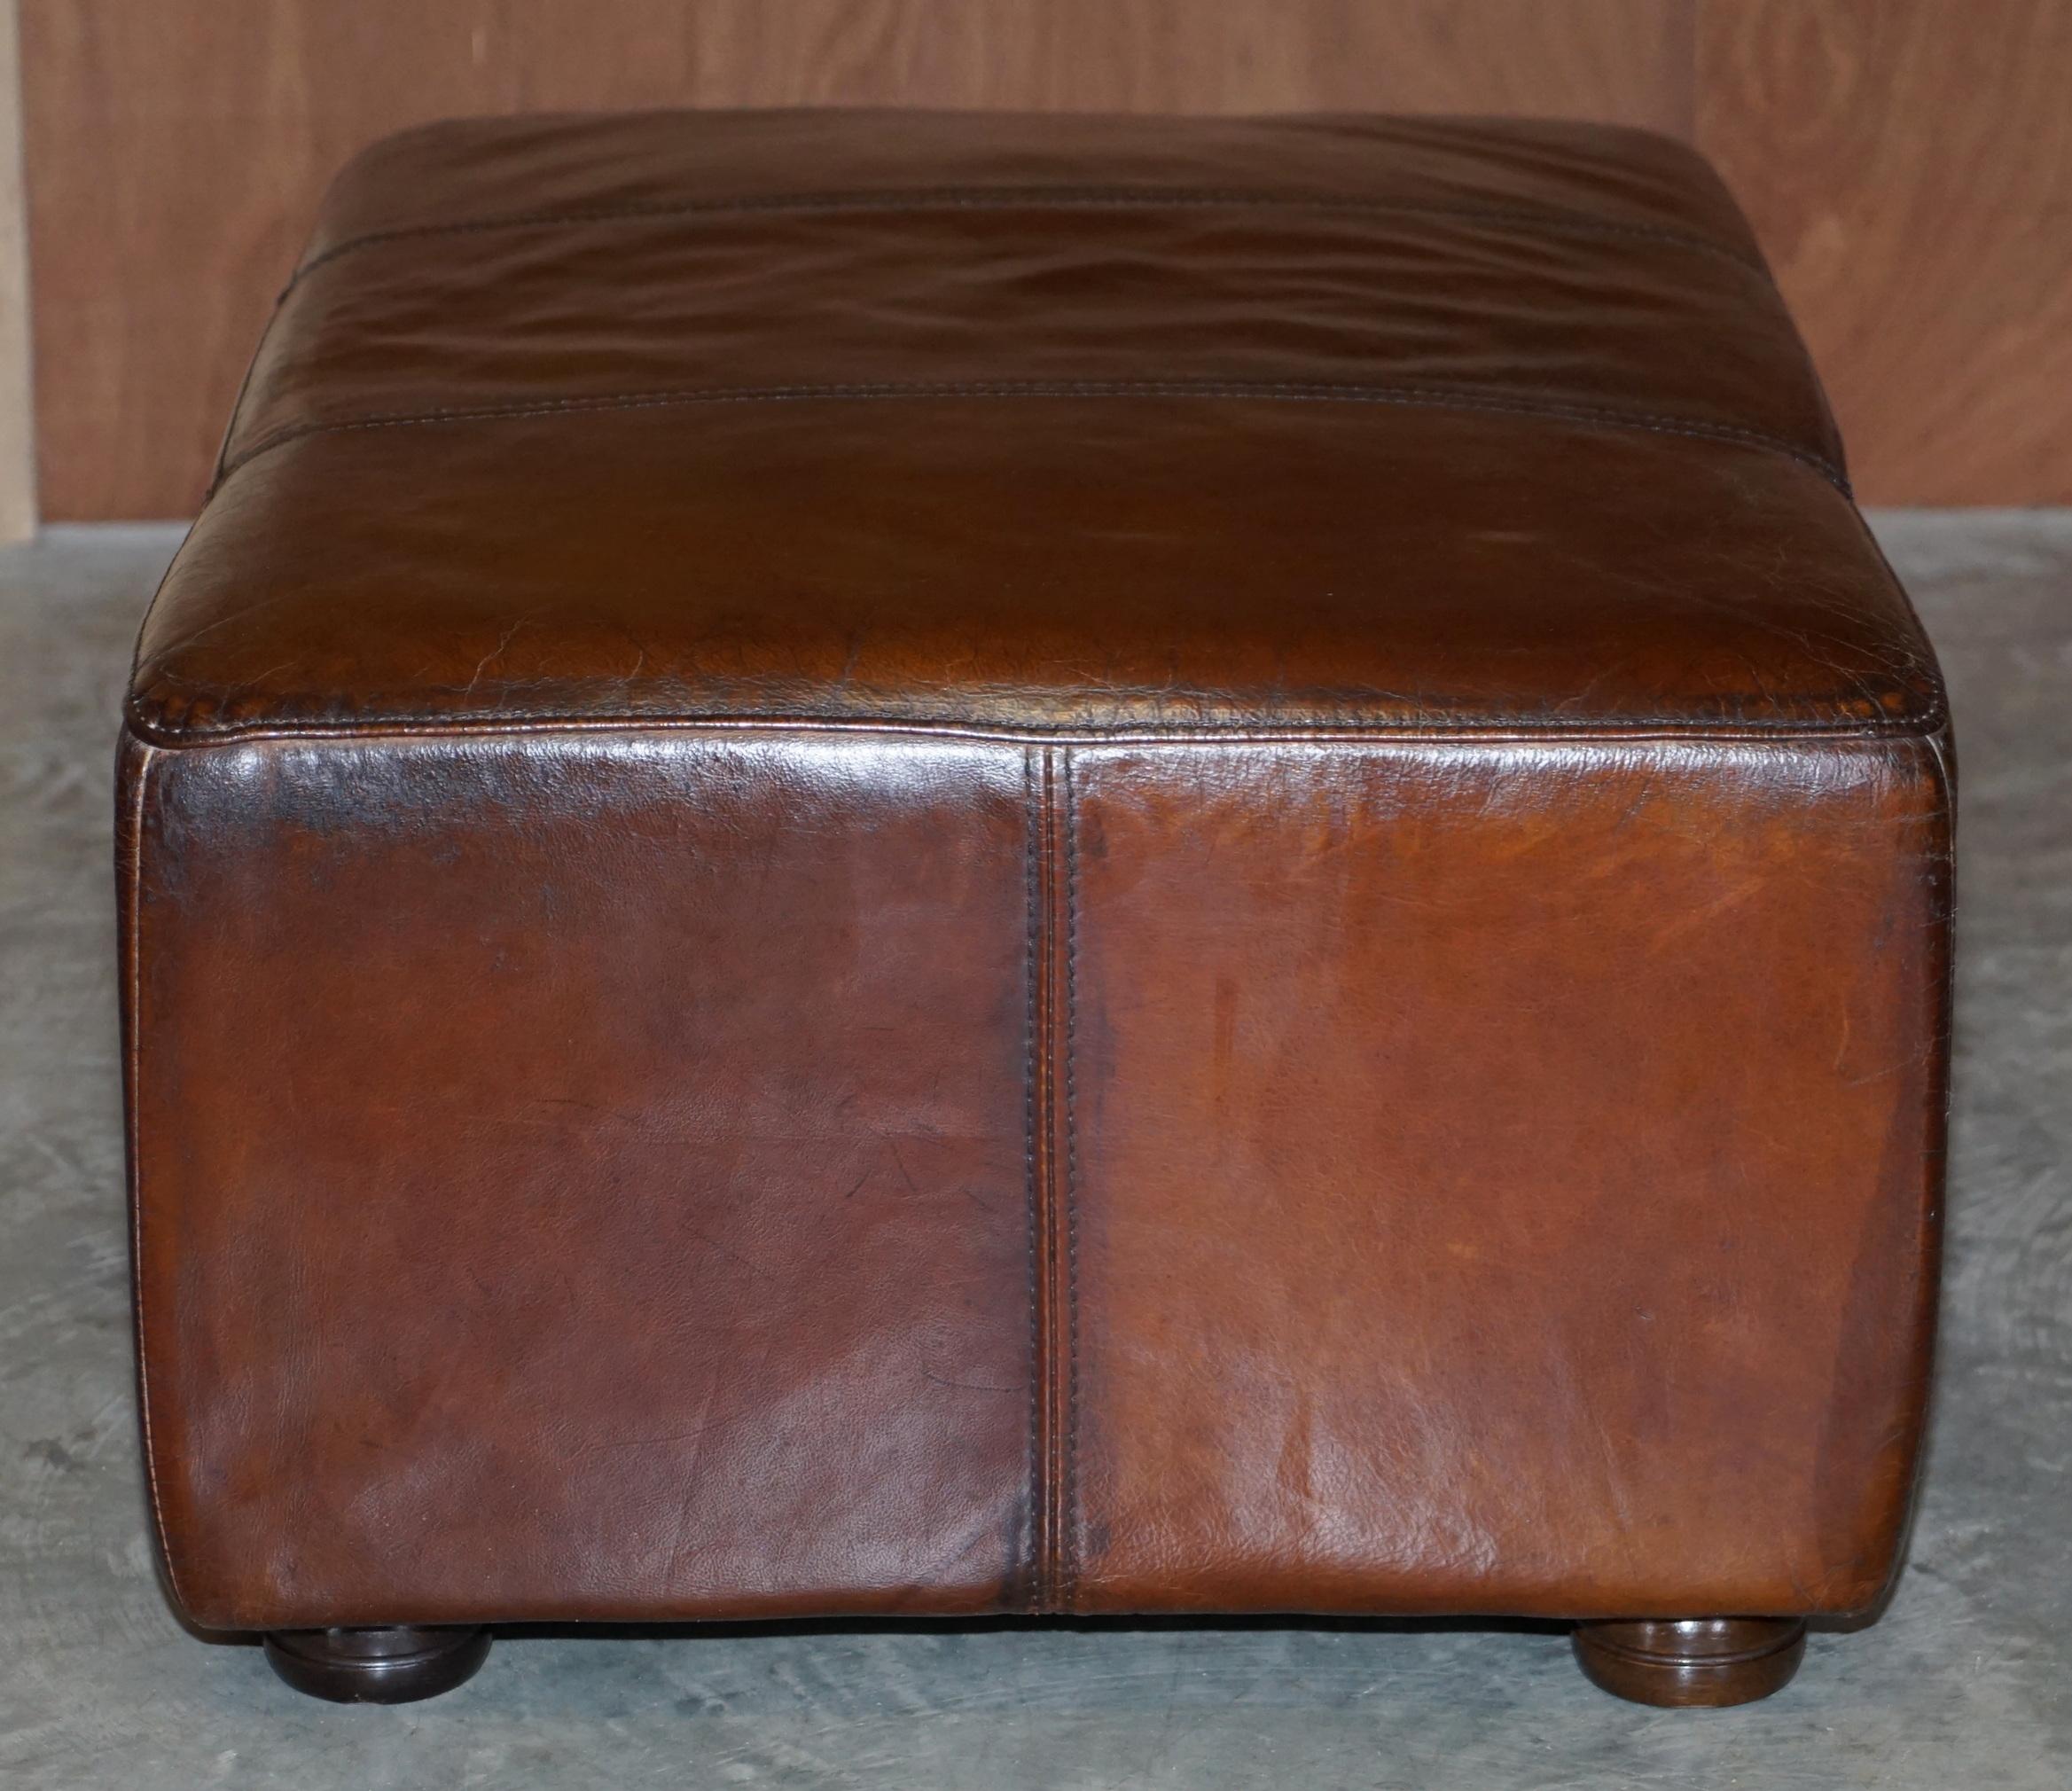 Lovely Large Fully Restored Halo Hand Dyed Brown Leather Footstool Ottoman 2